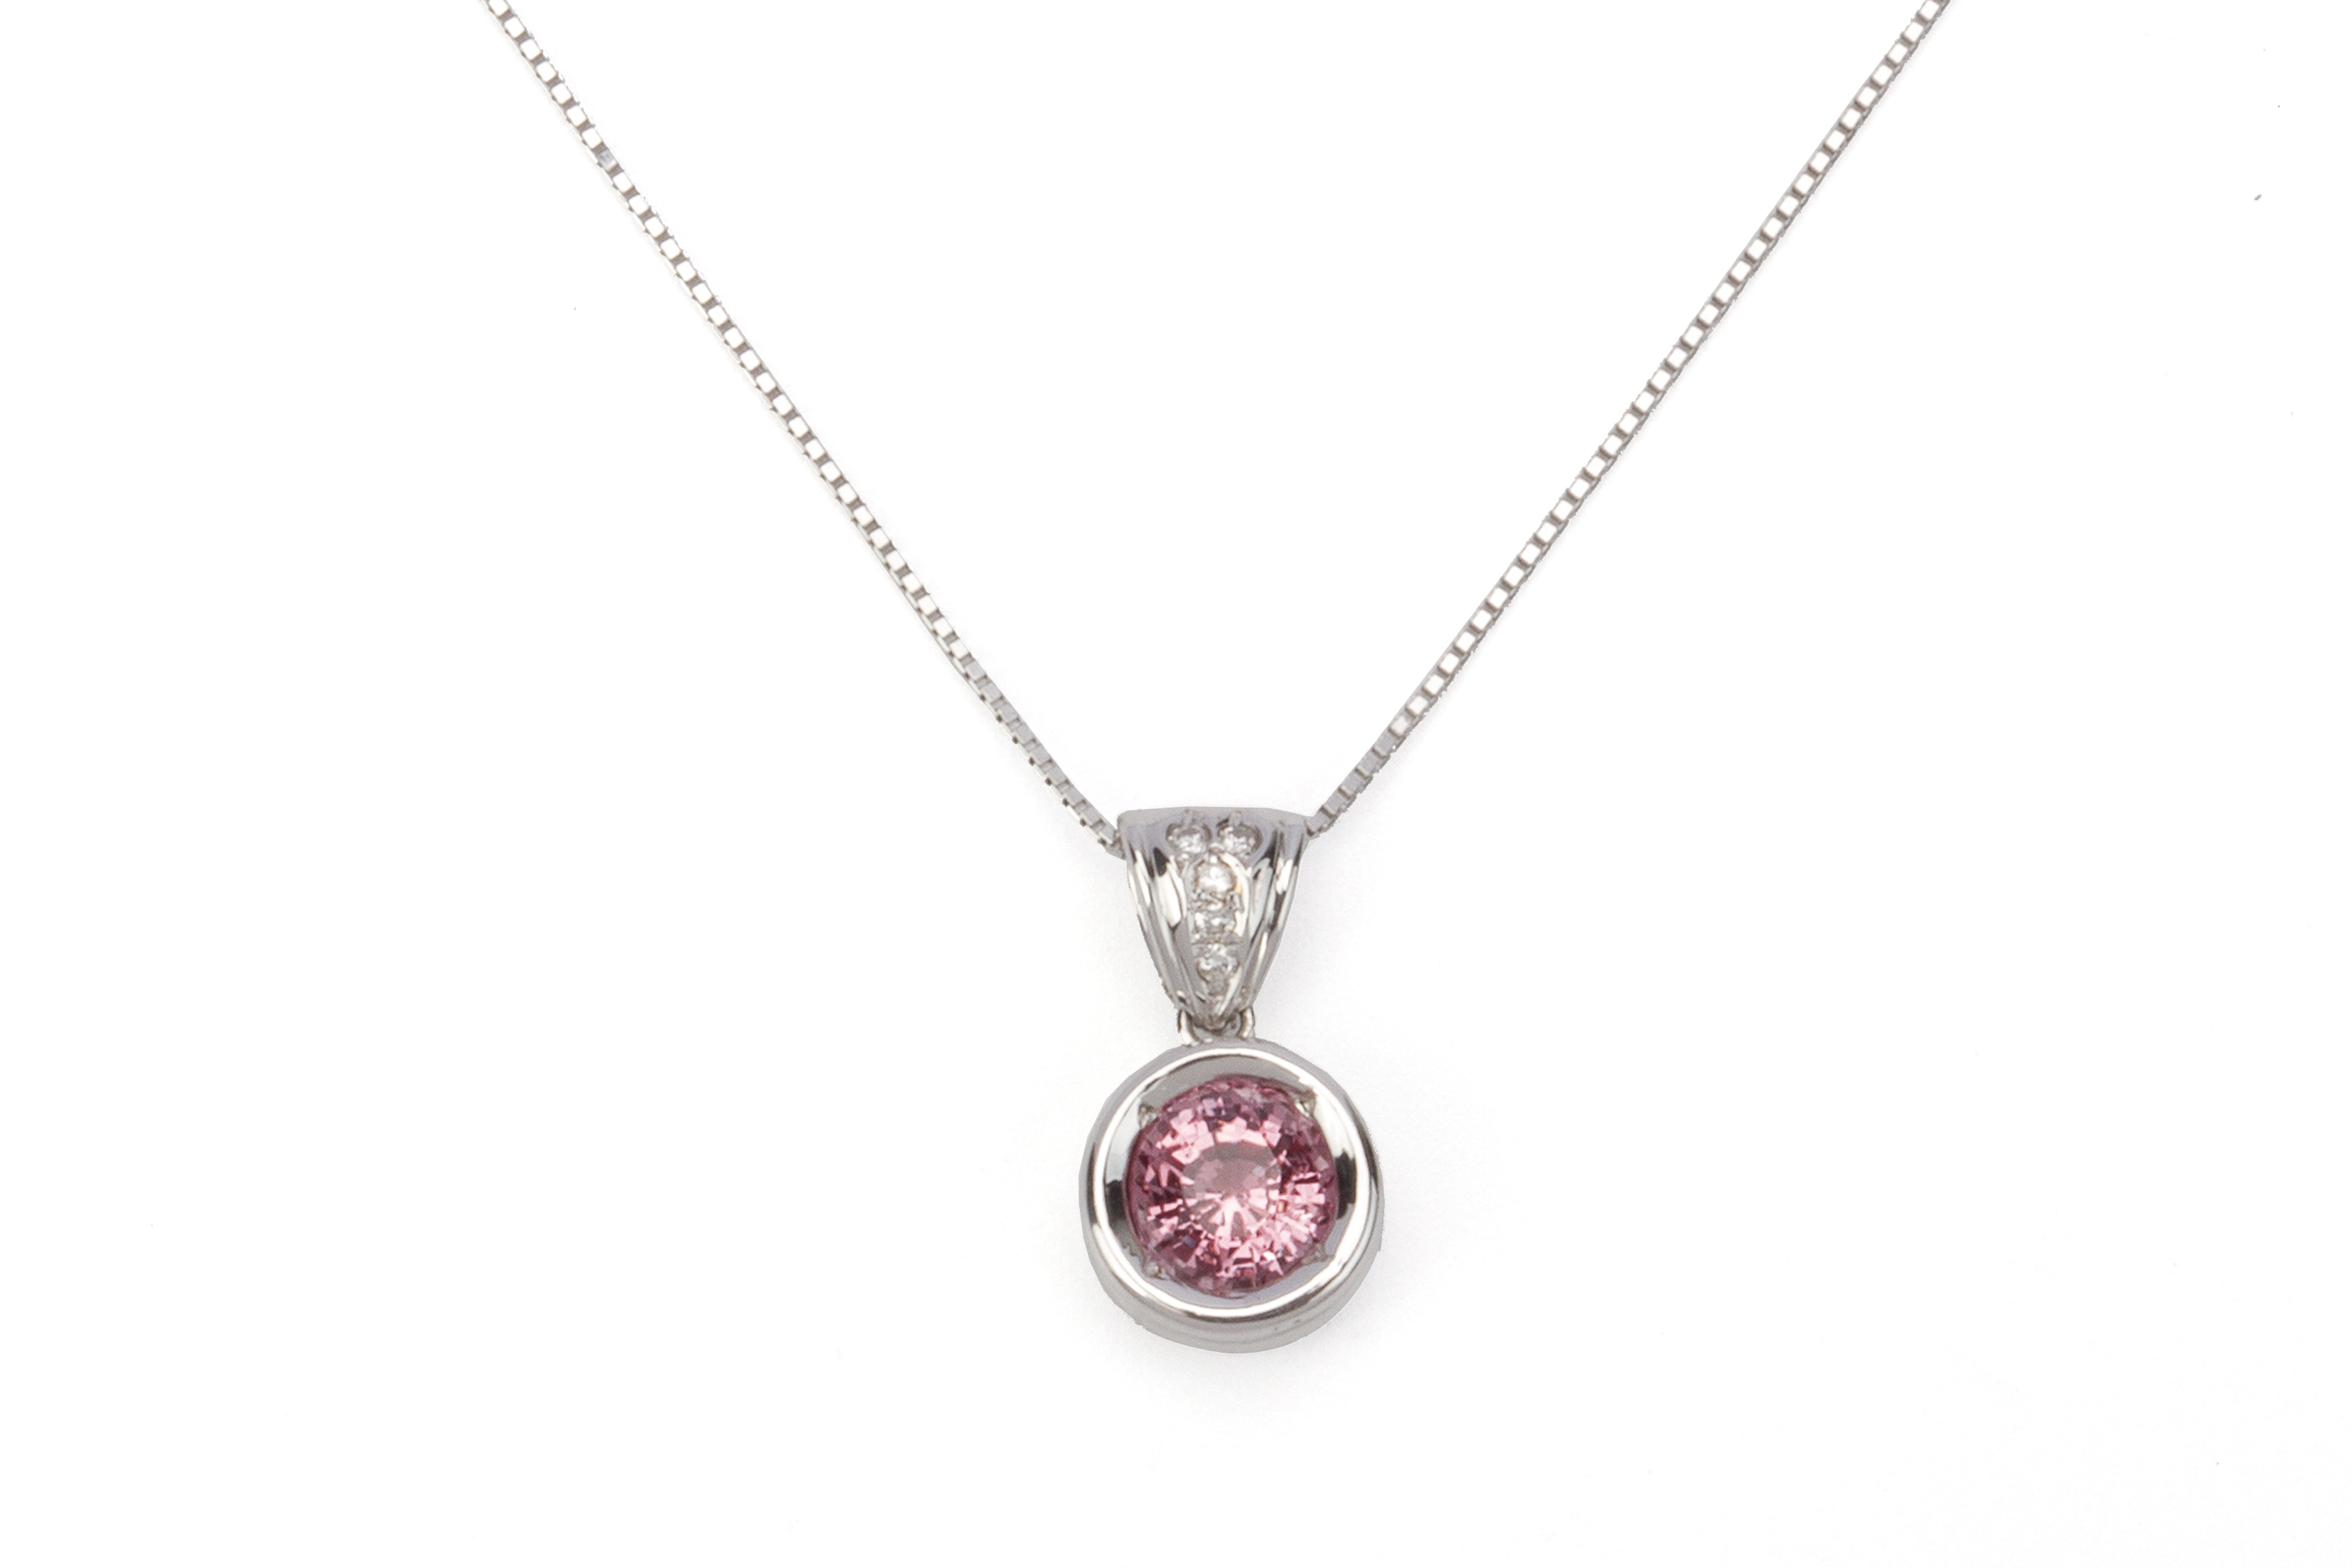 A PINK SPINEL AND DIAMOND PENDANT ON CHAIN